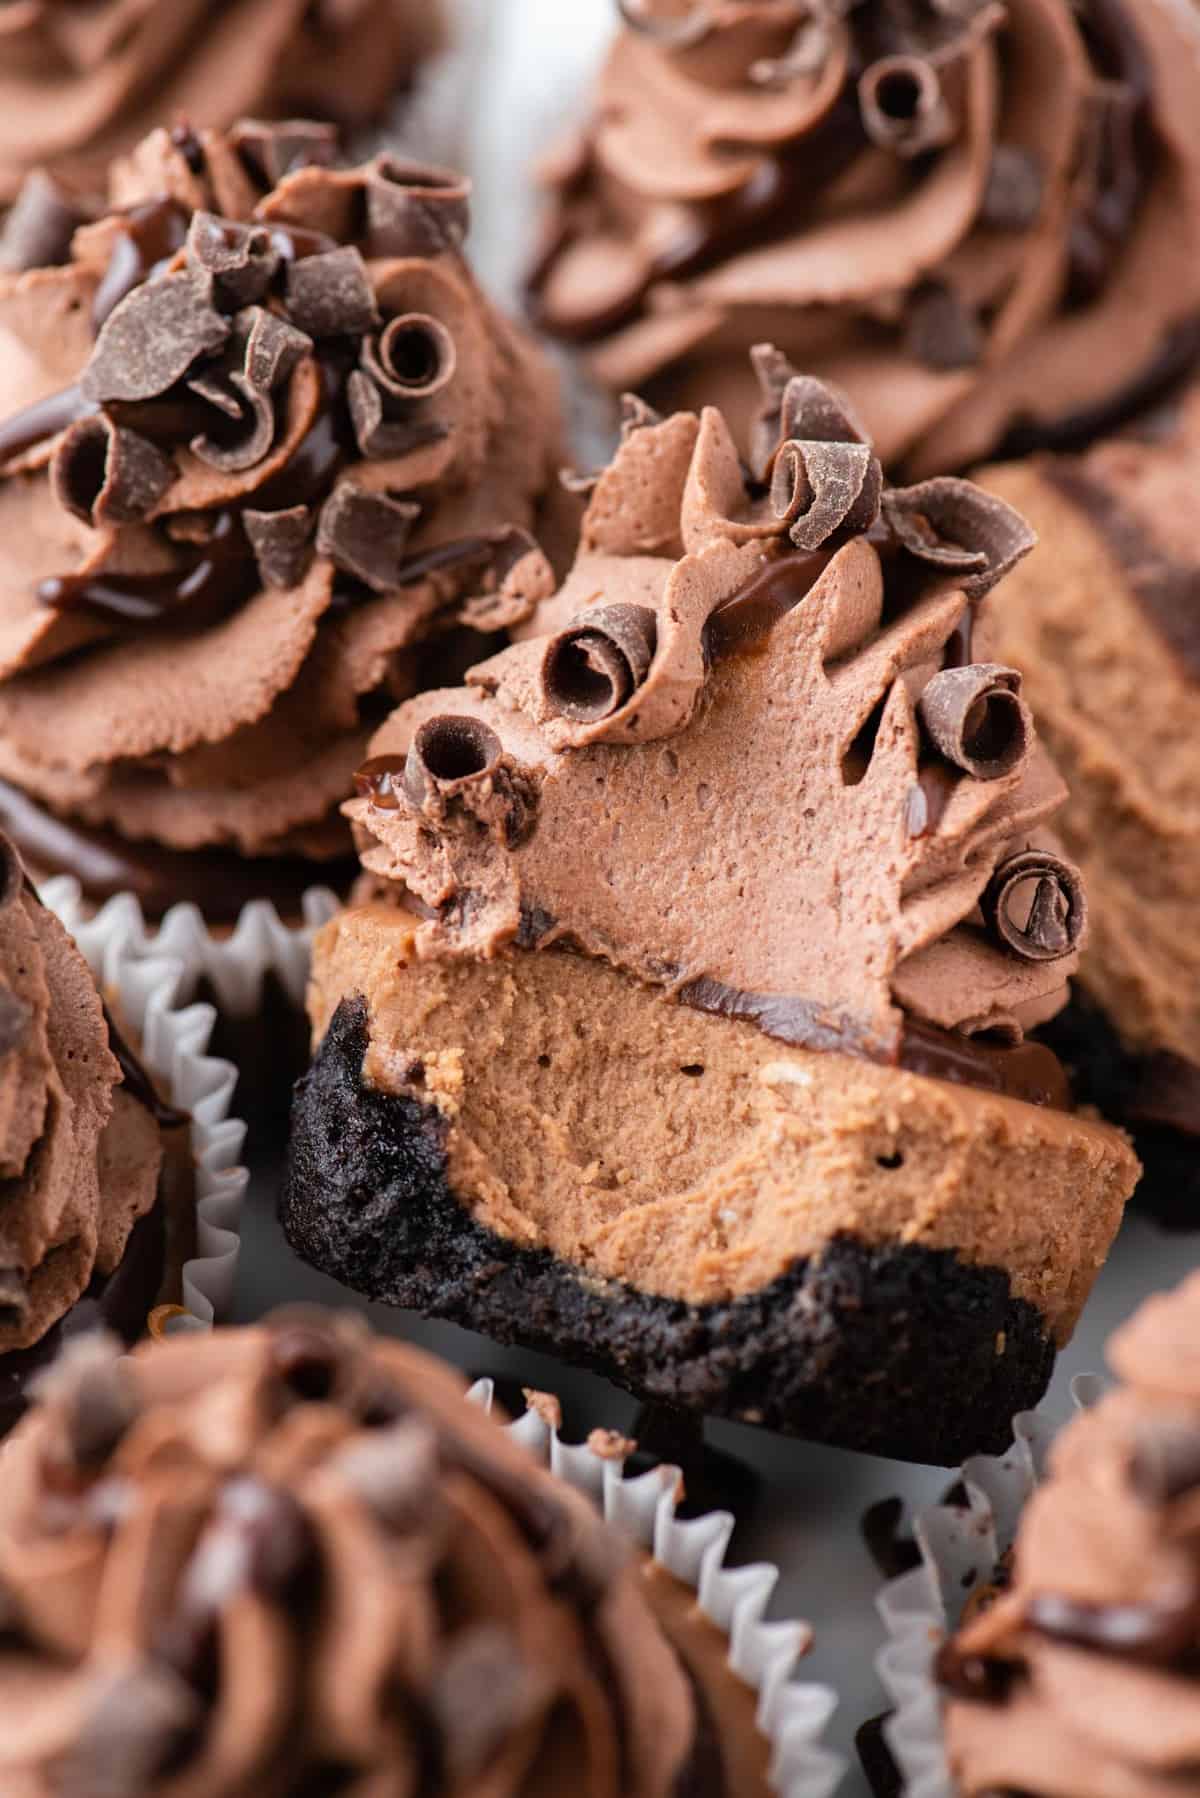 mini chocolate cheesecakes topped with chocolate whipped cream, chocolate ganache and chocolate shavings